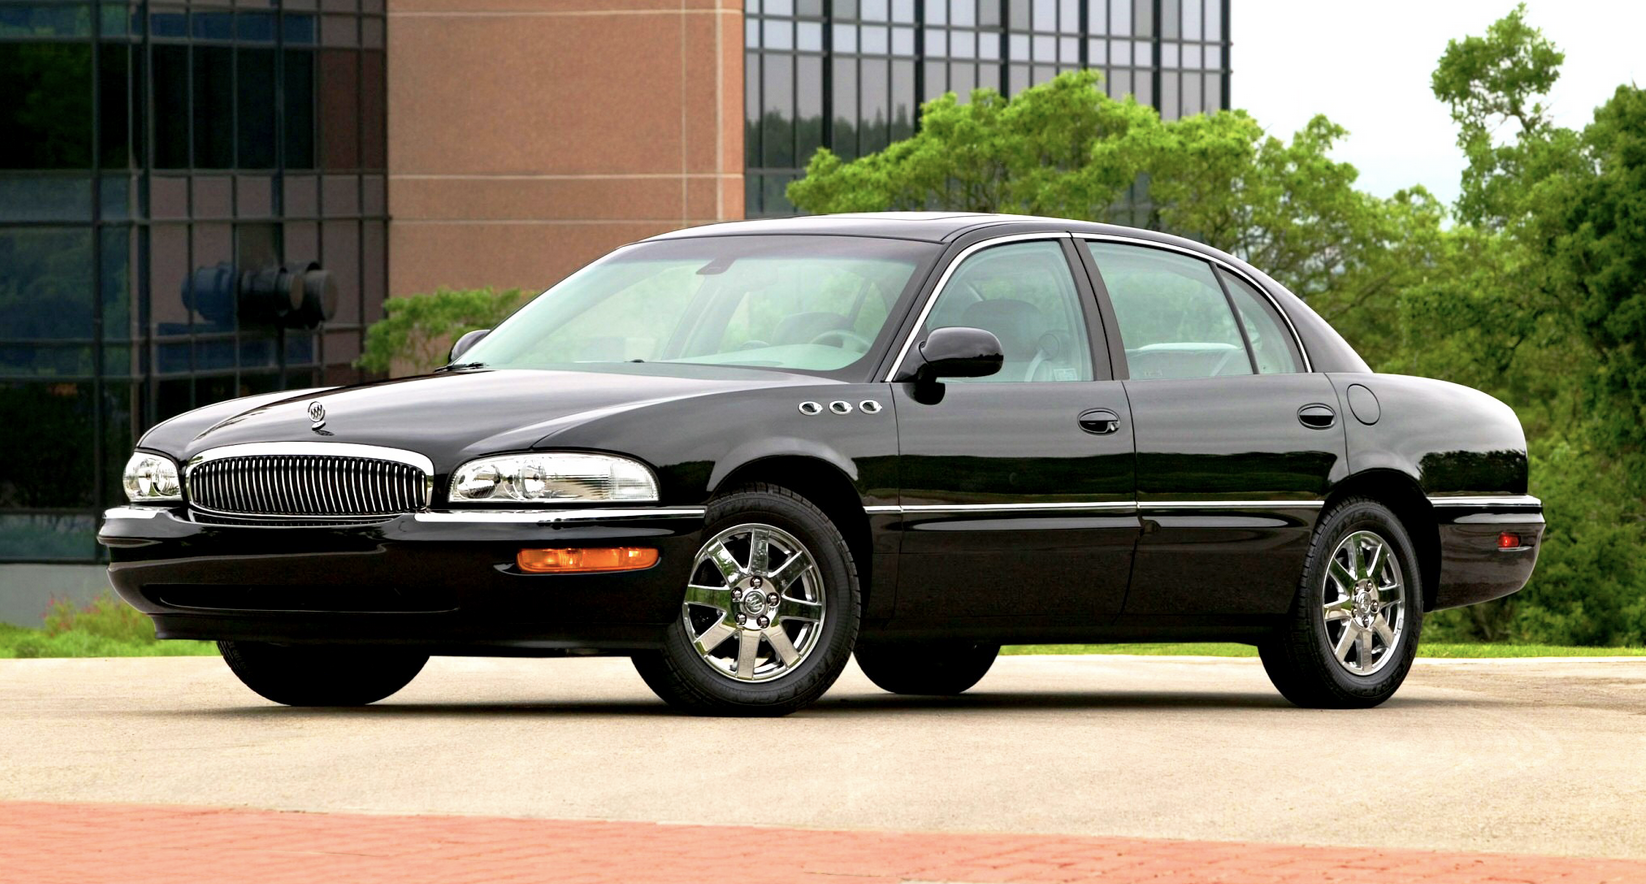 Review Flashback! 2005 Buick Park Avenue | The Daily Drive | Consumer  Guide® The Daily Drive | Consumer Guide®